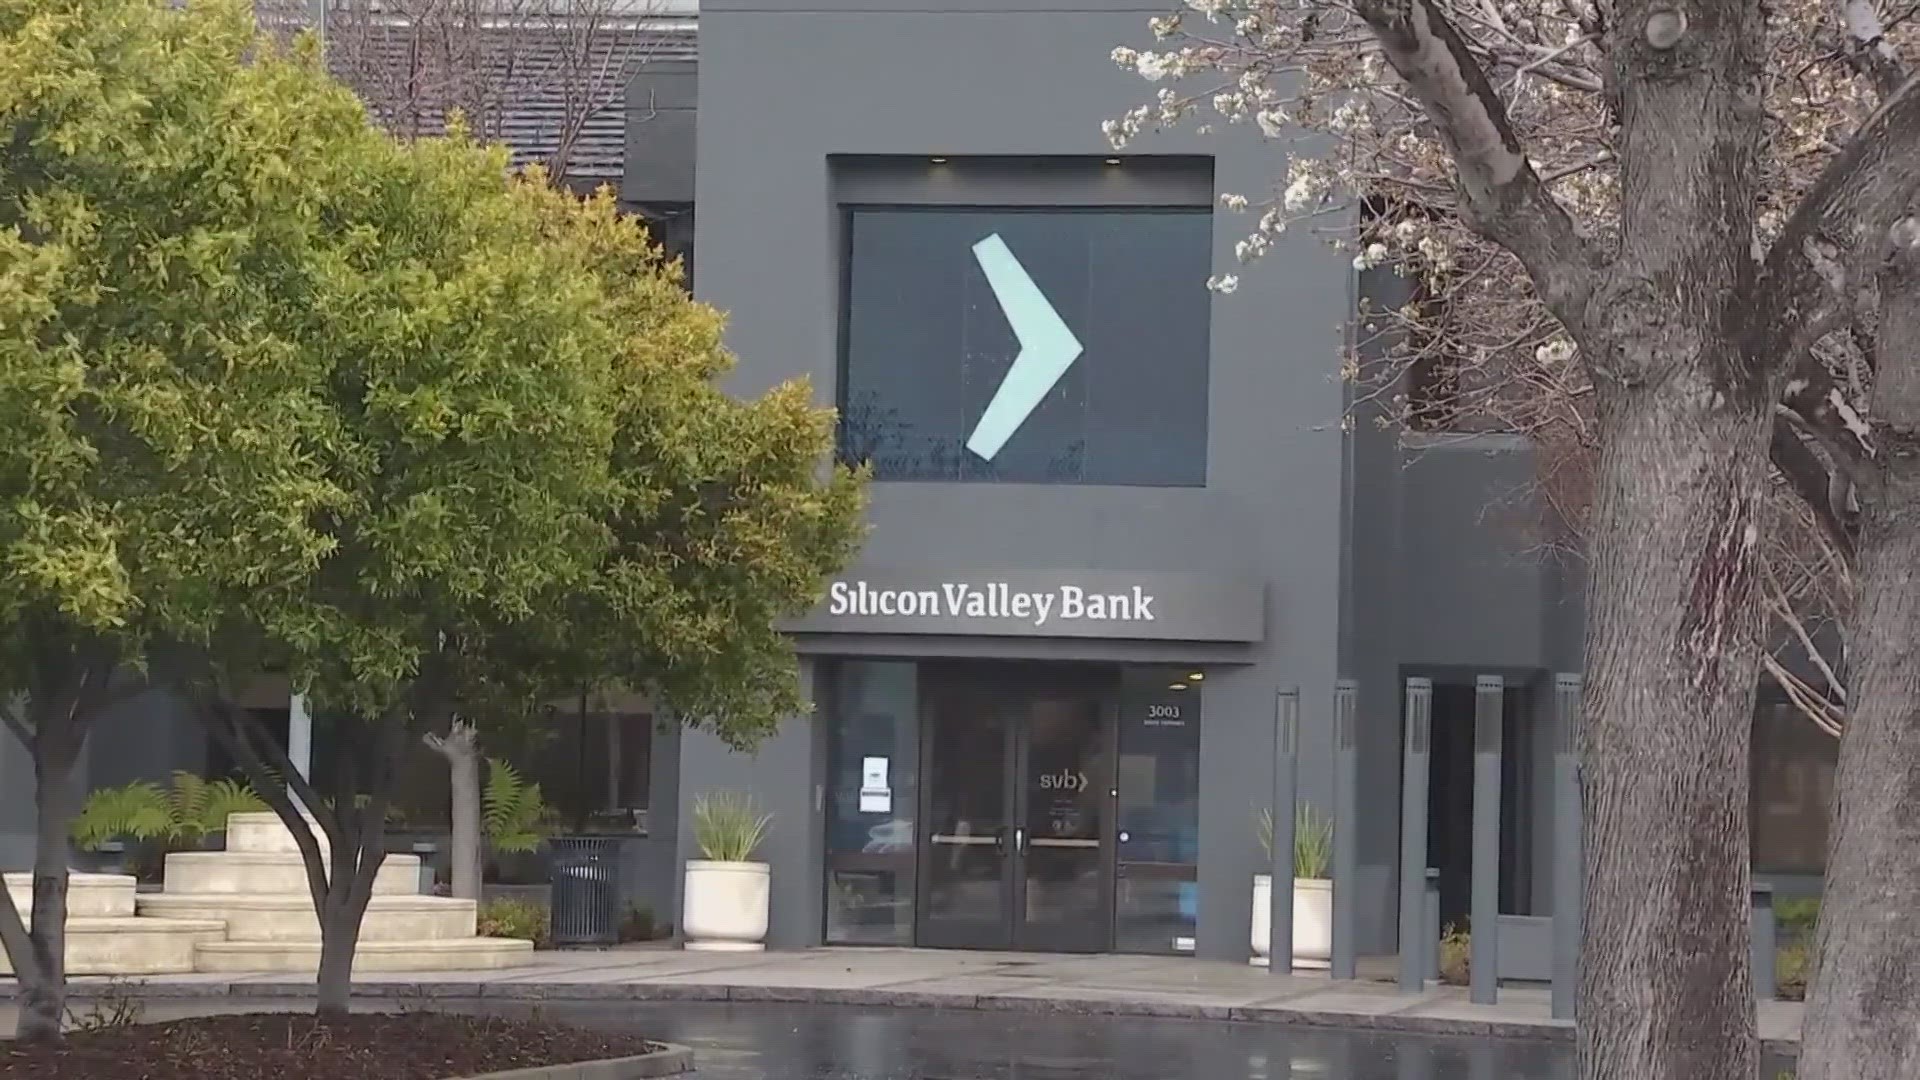 What is the next steps for Silicon Valley bank holders?